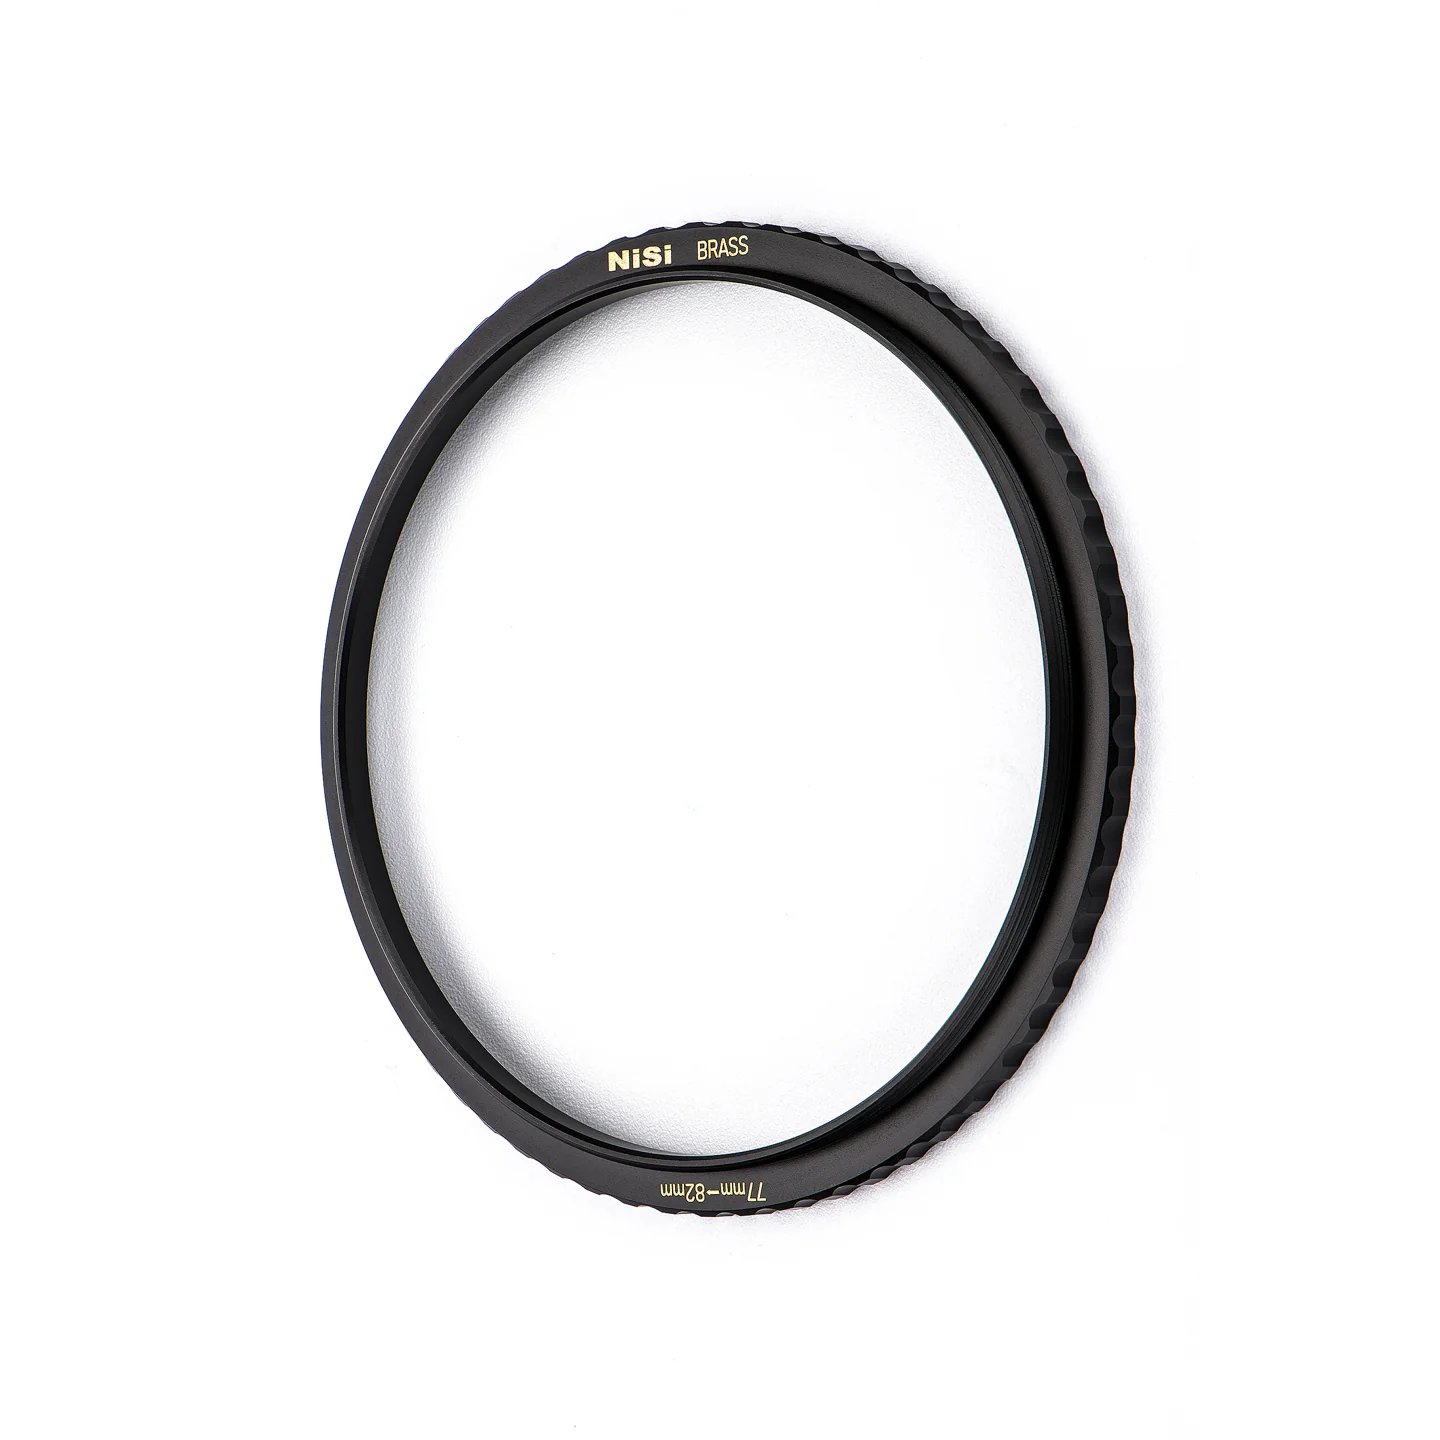 NiSi 67-82mm Brass Step Rings for Circular Filters Nisi Stepping Ring